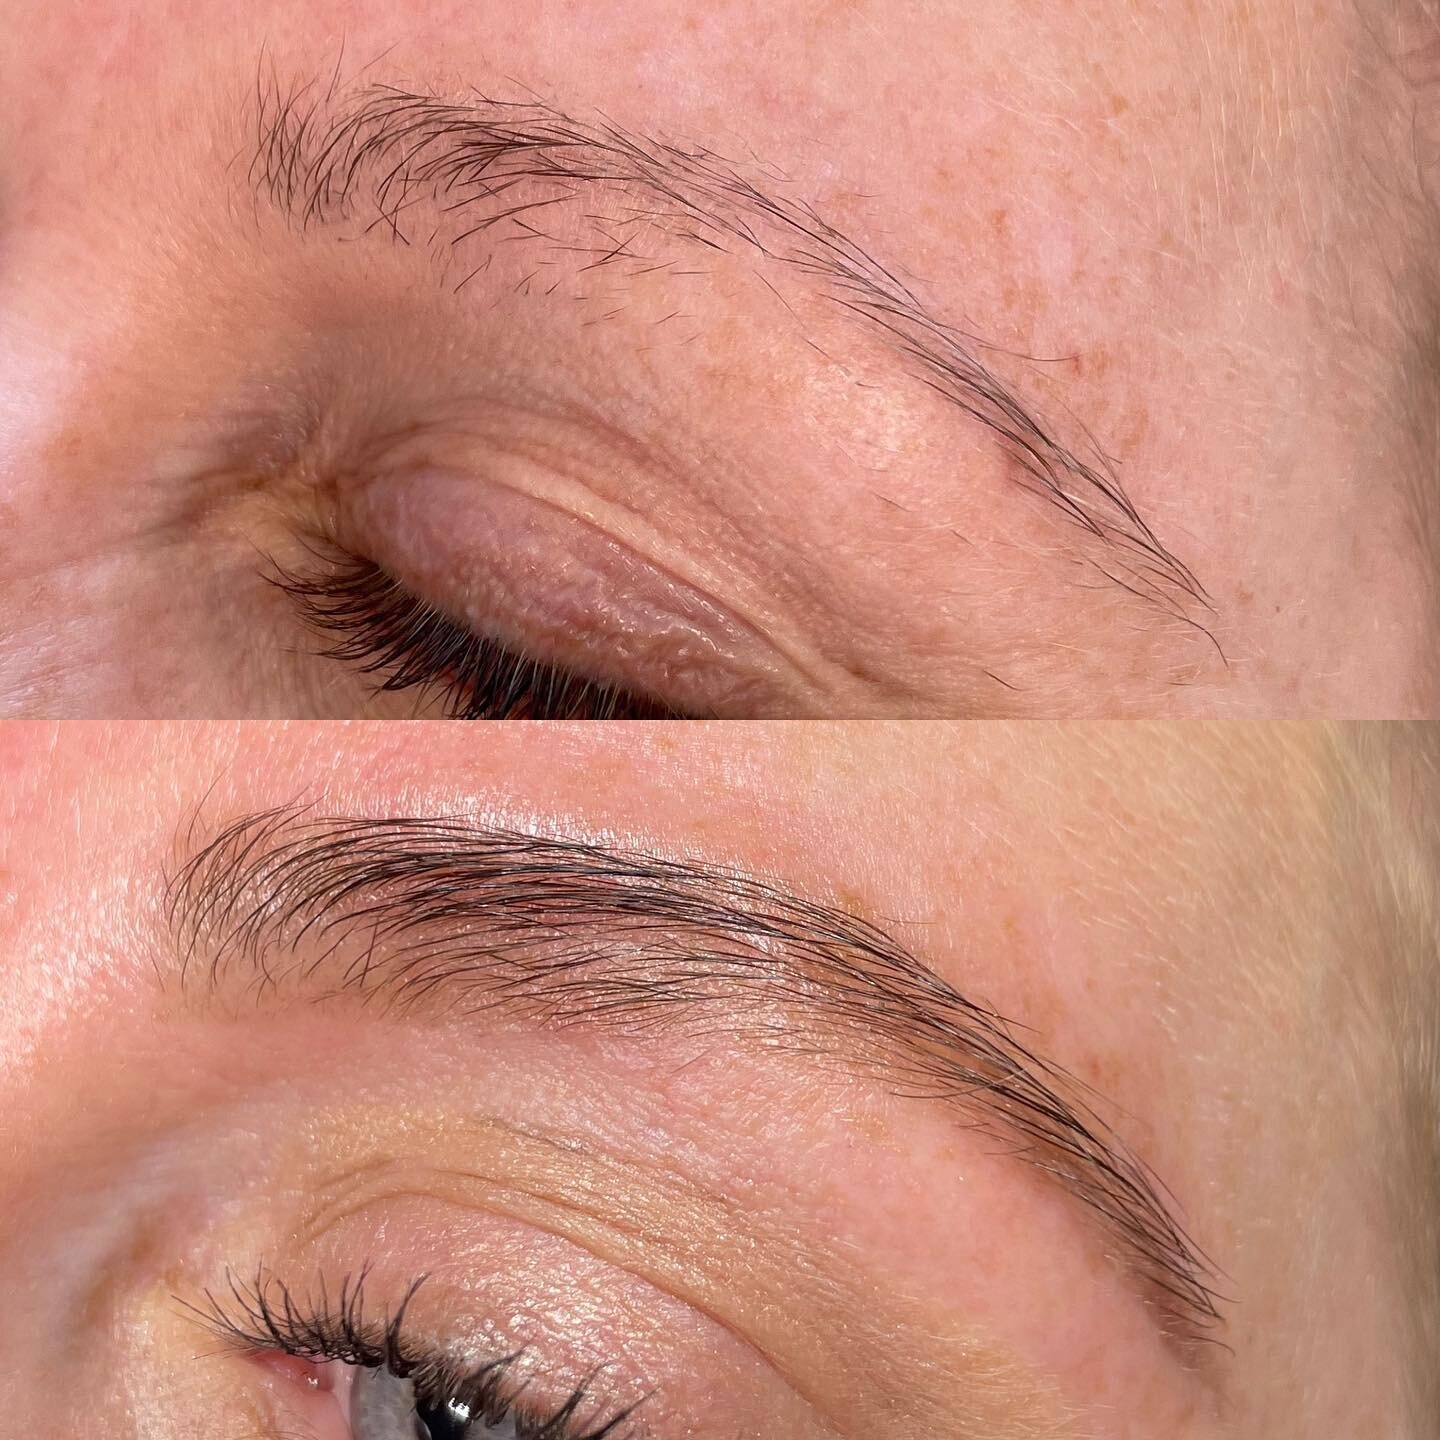 Can we just take a moment to appreciate the power of a good brow rehab programme 🪄

This before and after is taken 6 months apart. With the magic of @revitalashnewzealand Brow serum &amp; regular brow appointments, we are almost there 👏🏼

For more